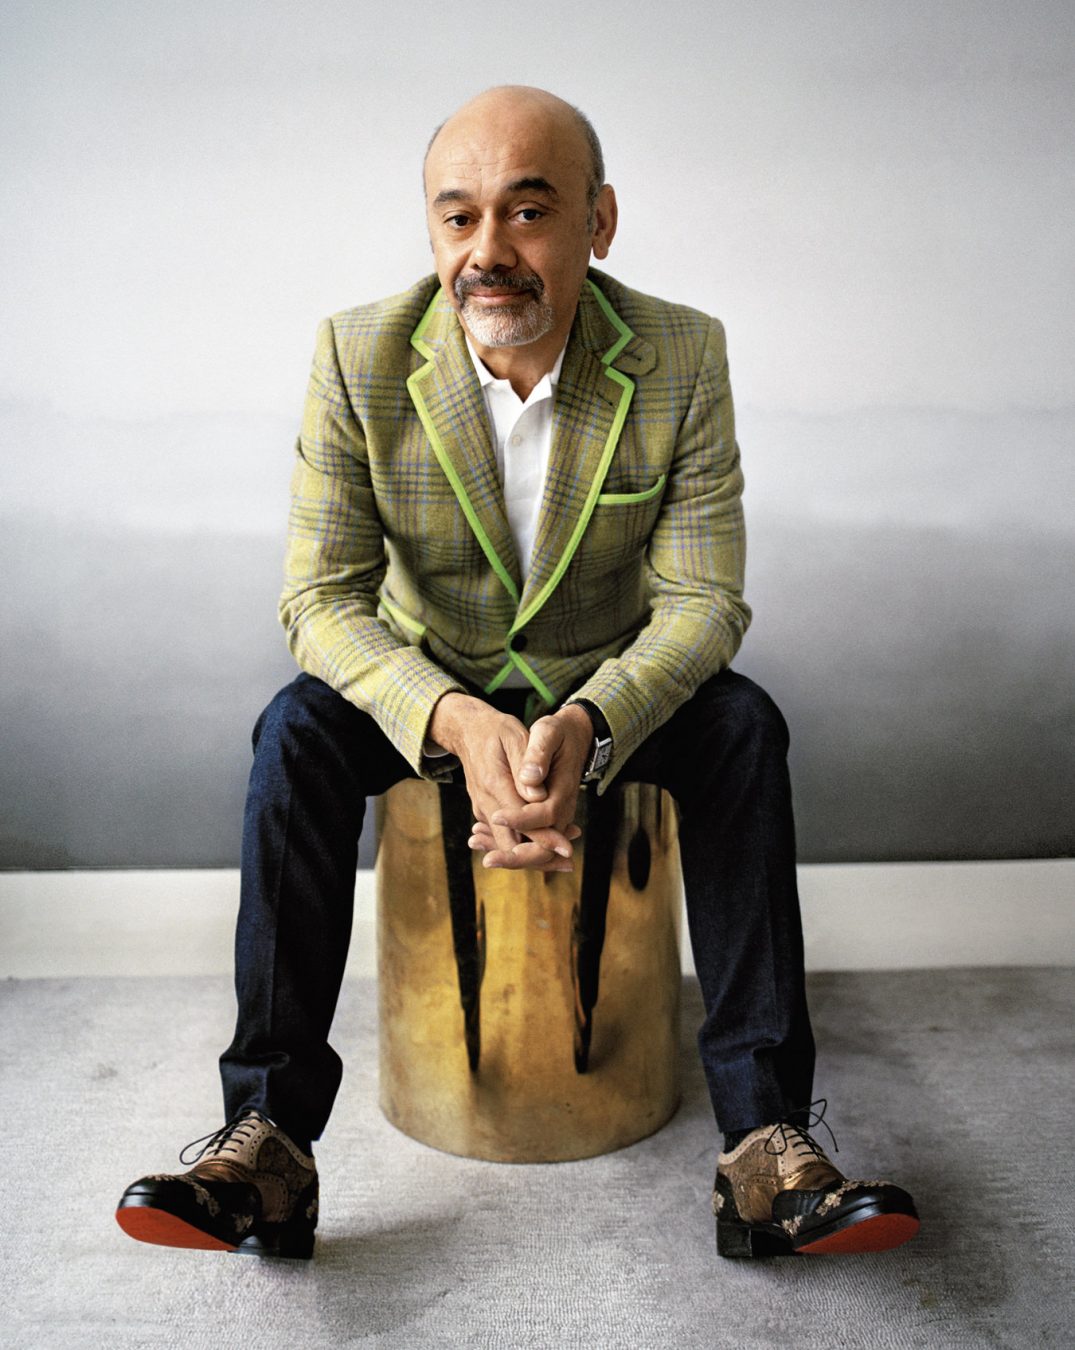 French shoe designer Christian Louboutin poses with his award at